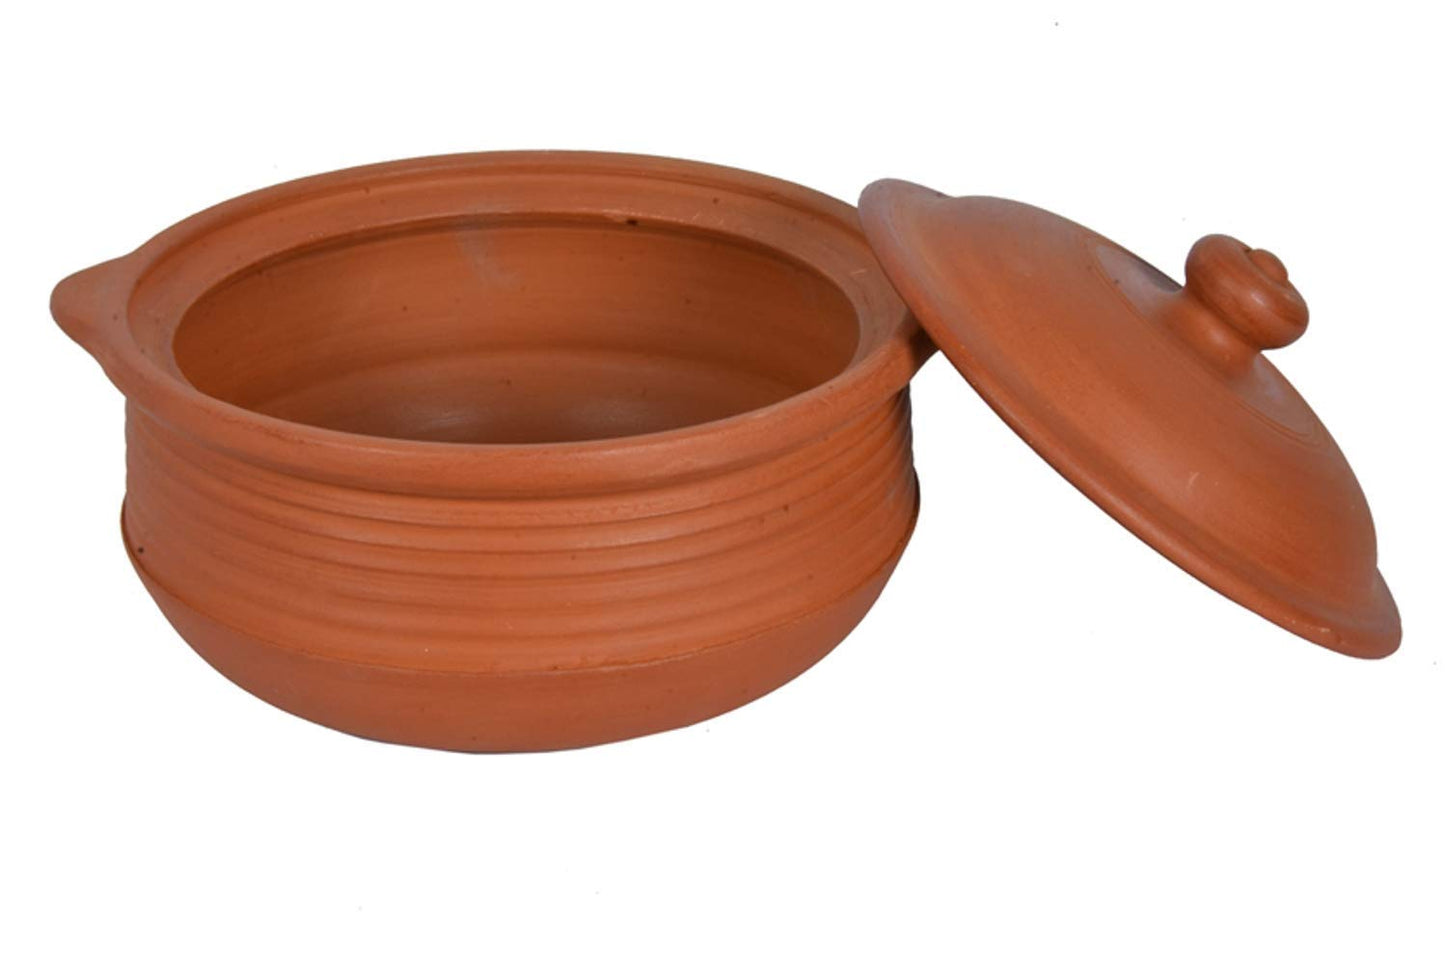 Earthen Clay Cooking Bowl 3.7qt